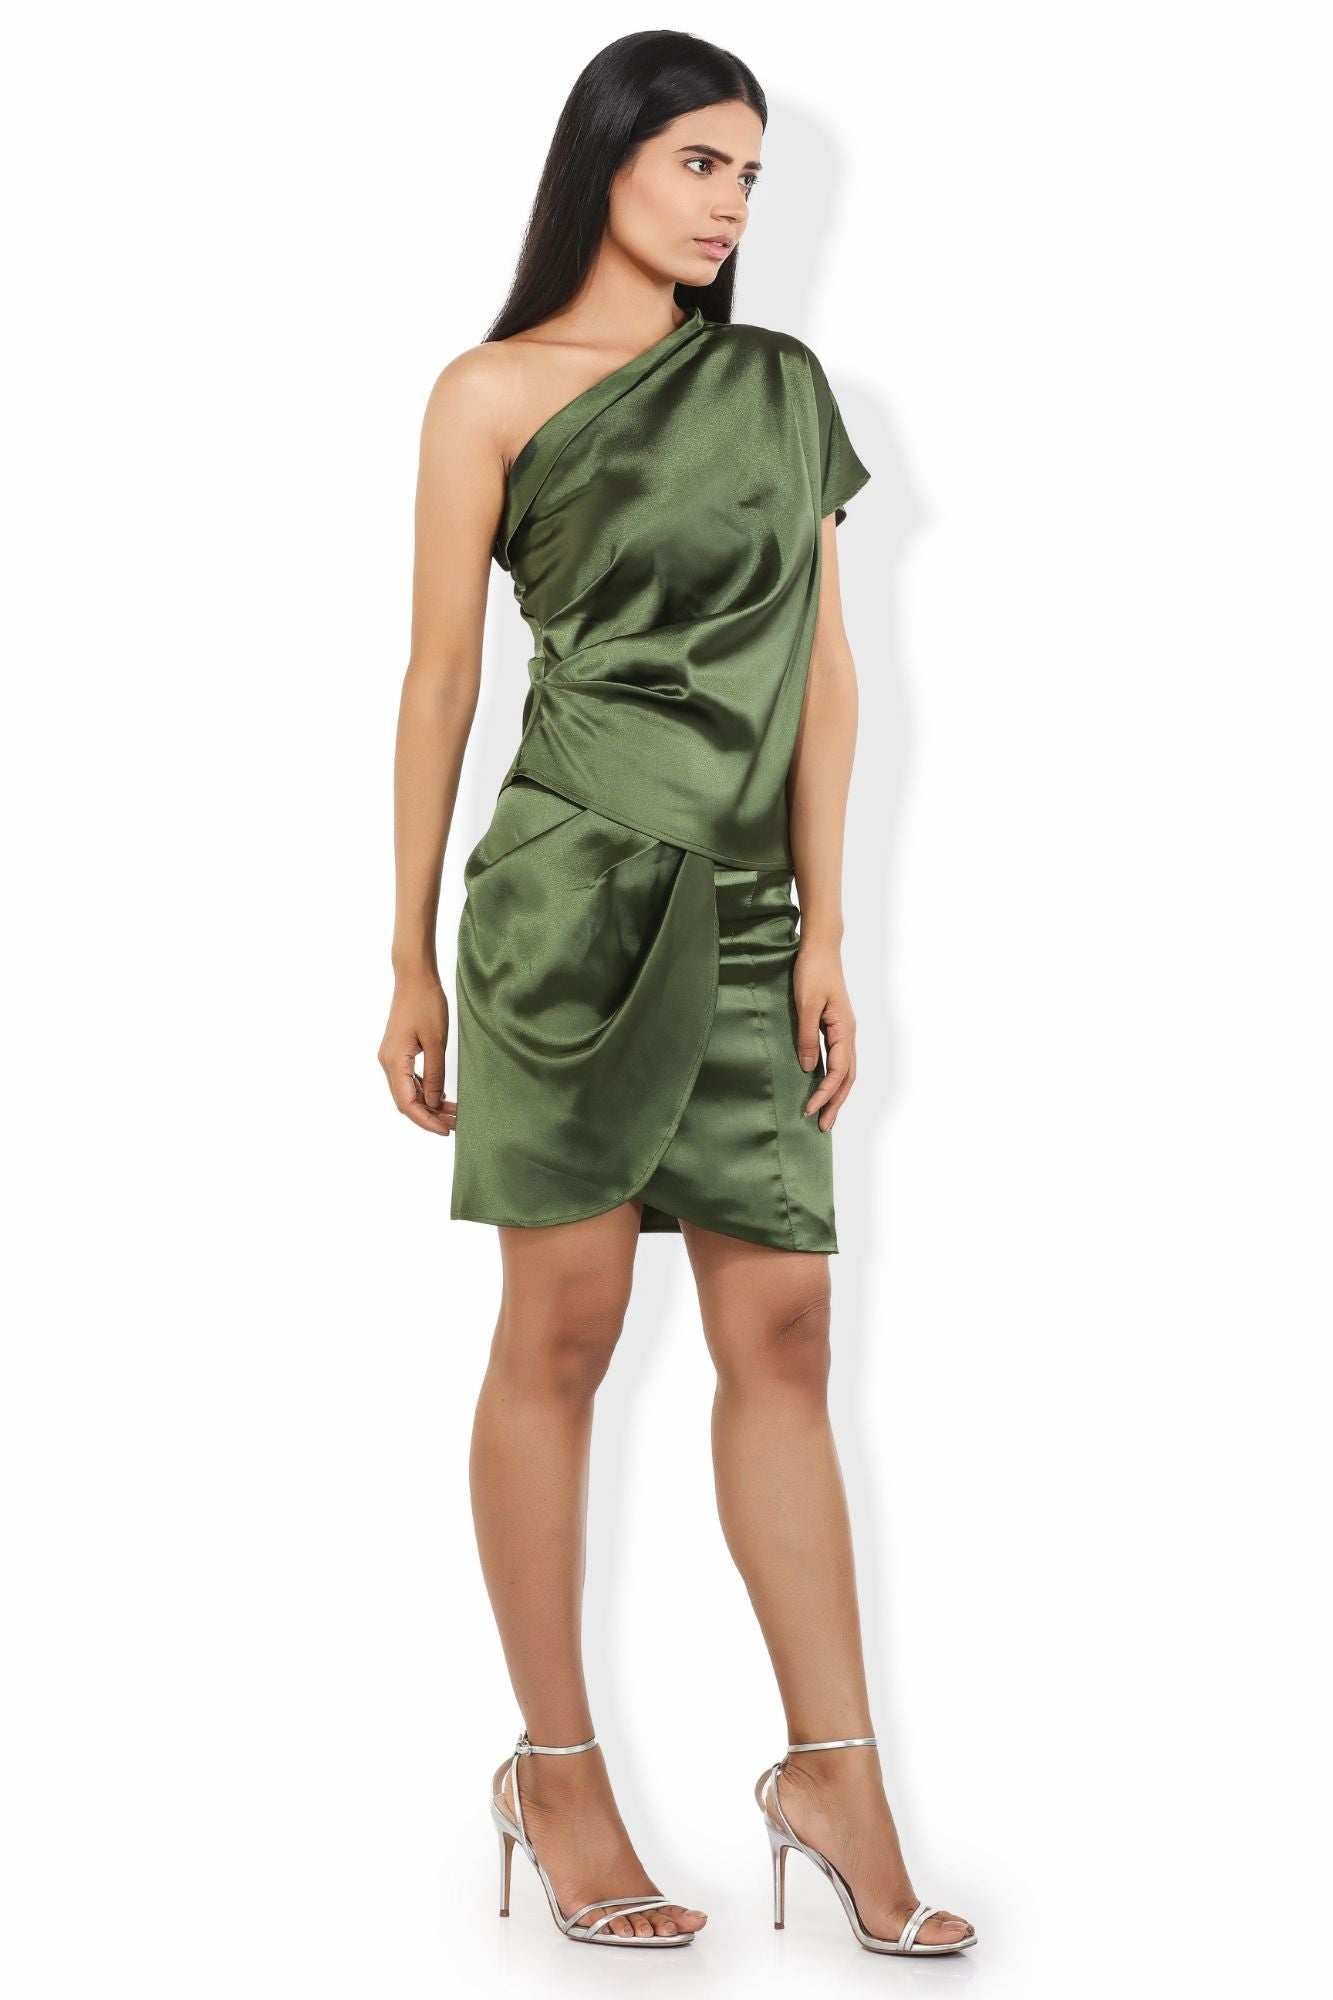 shiny satin olive green ruched top